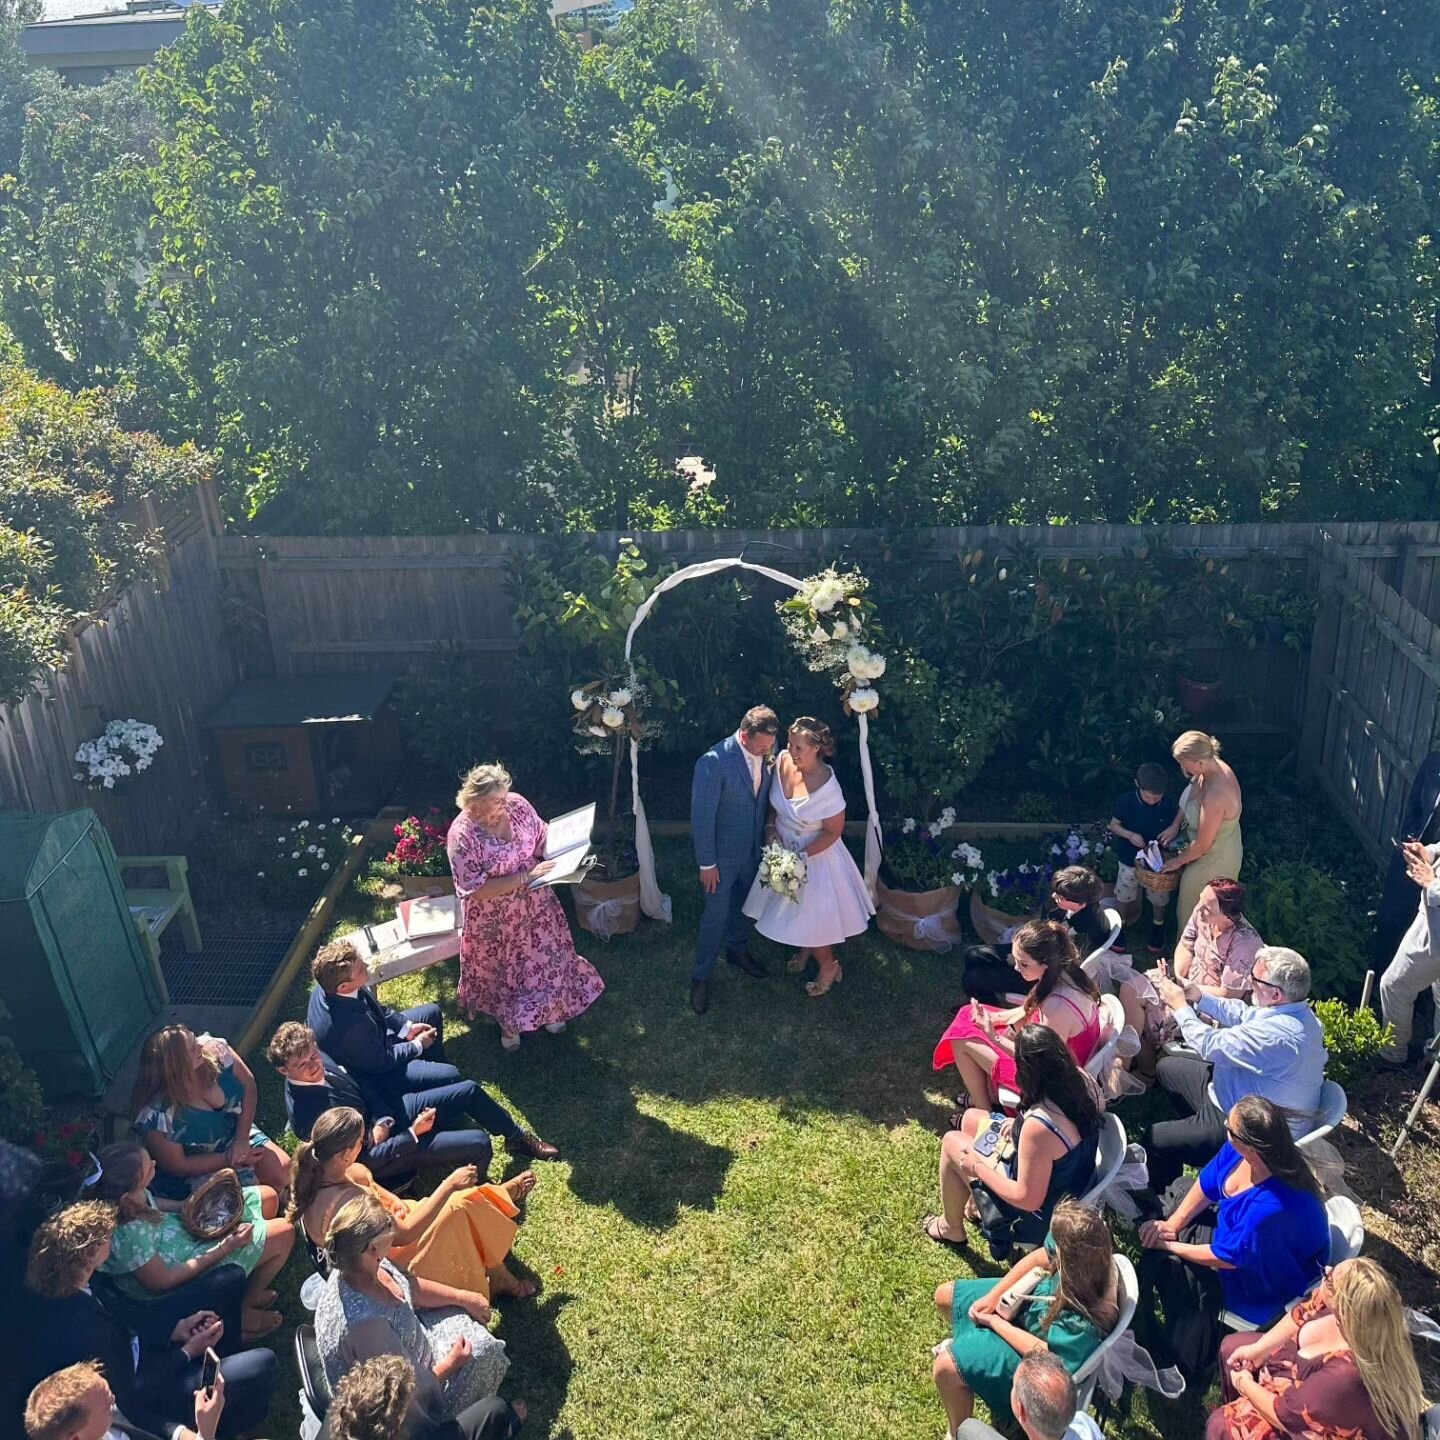 Backyard Weddings are fun and relaxed for everyone. 

Marrying Dan &amp; Mel recently also included bringing their two families together. 

It was a hot summers day, and their family from the UK nearly melted. They were certainly a little pink at the